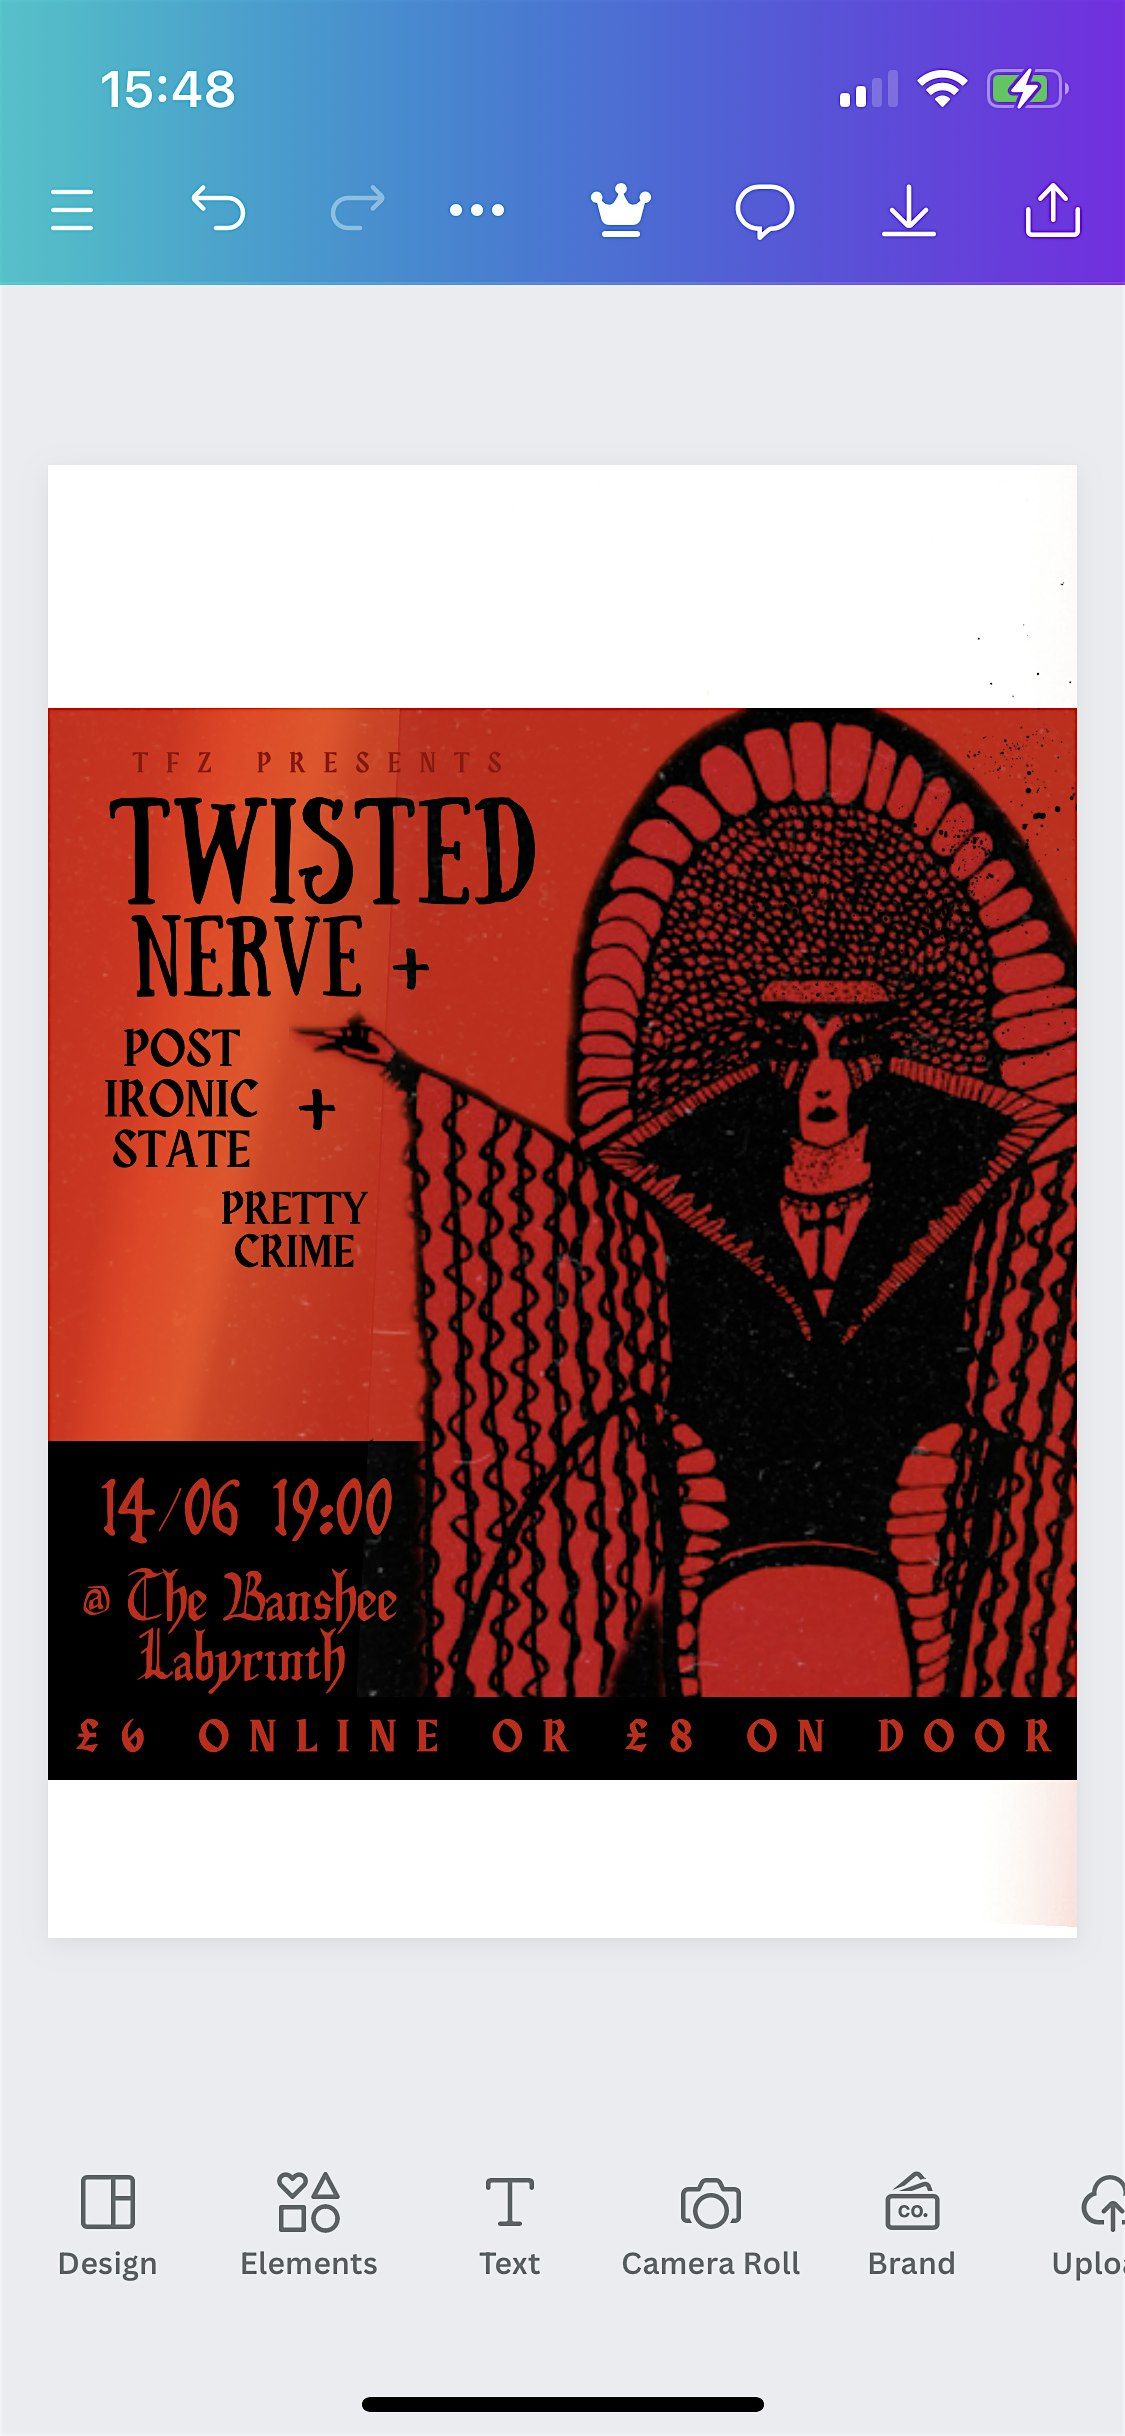 TFZ: A GOTHIC NIGHT WITH TWISTED NERVE, POST IRONIC STATE AND PRETTY CRIME